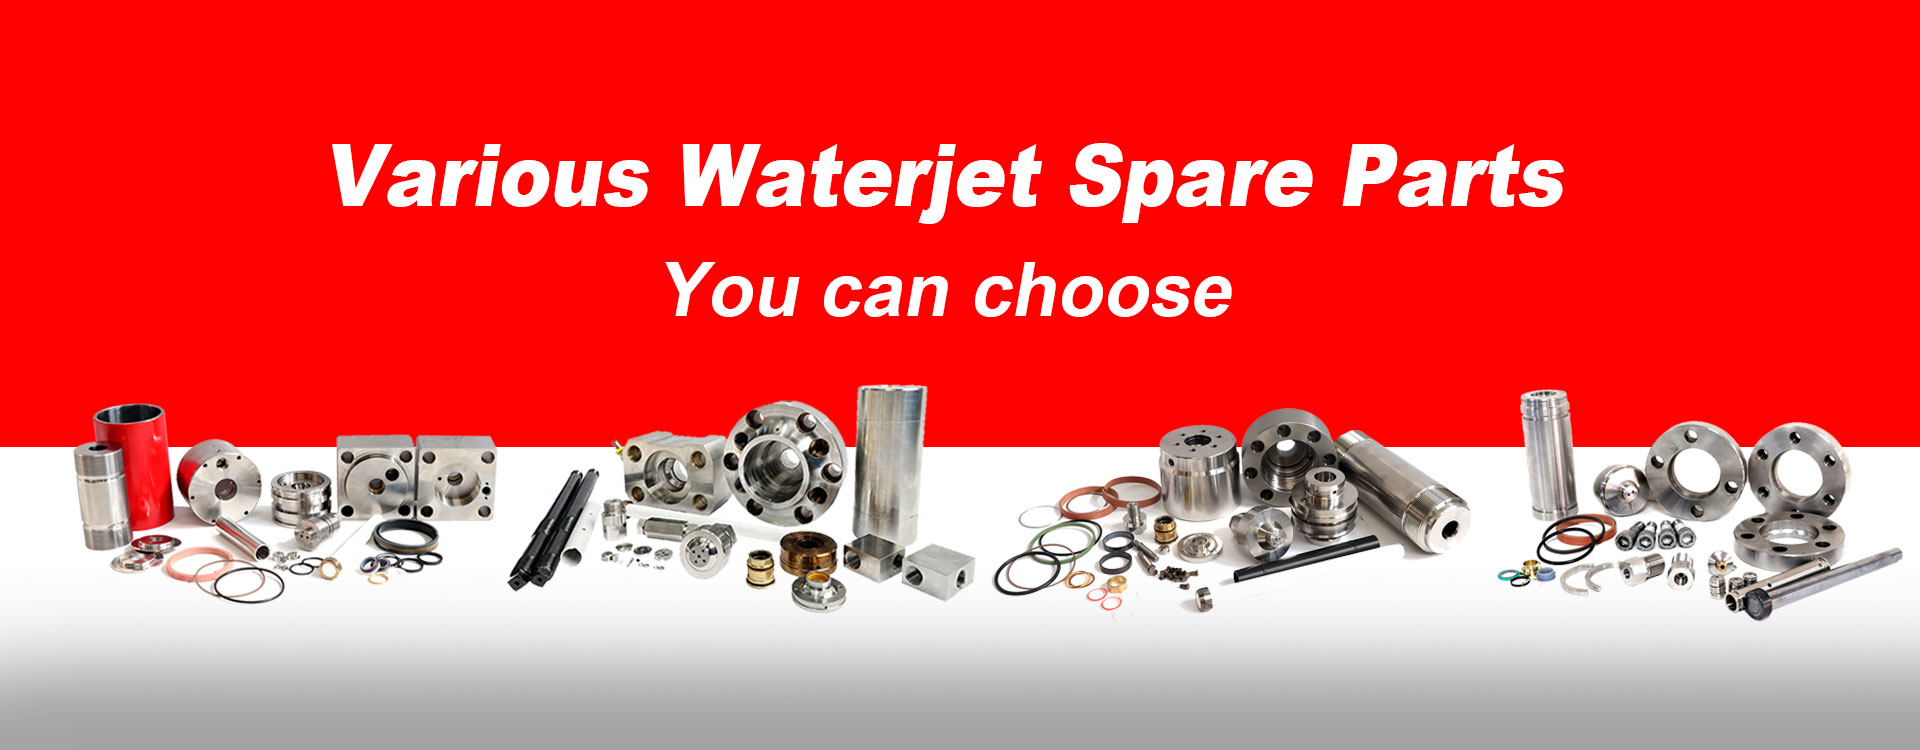 Waterjet spare parts